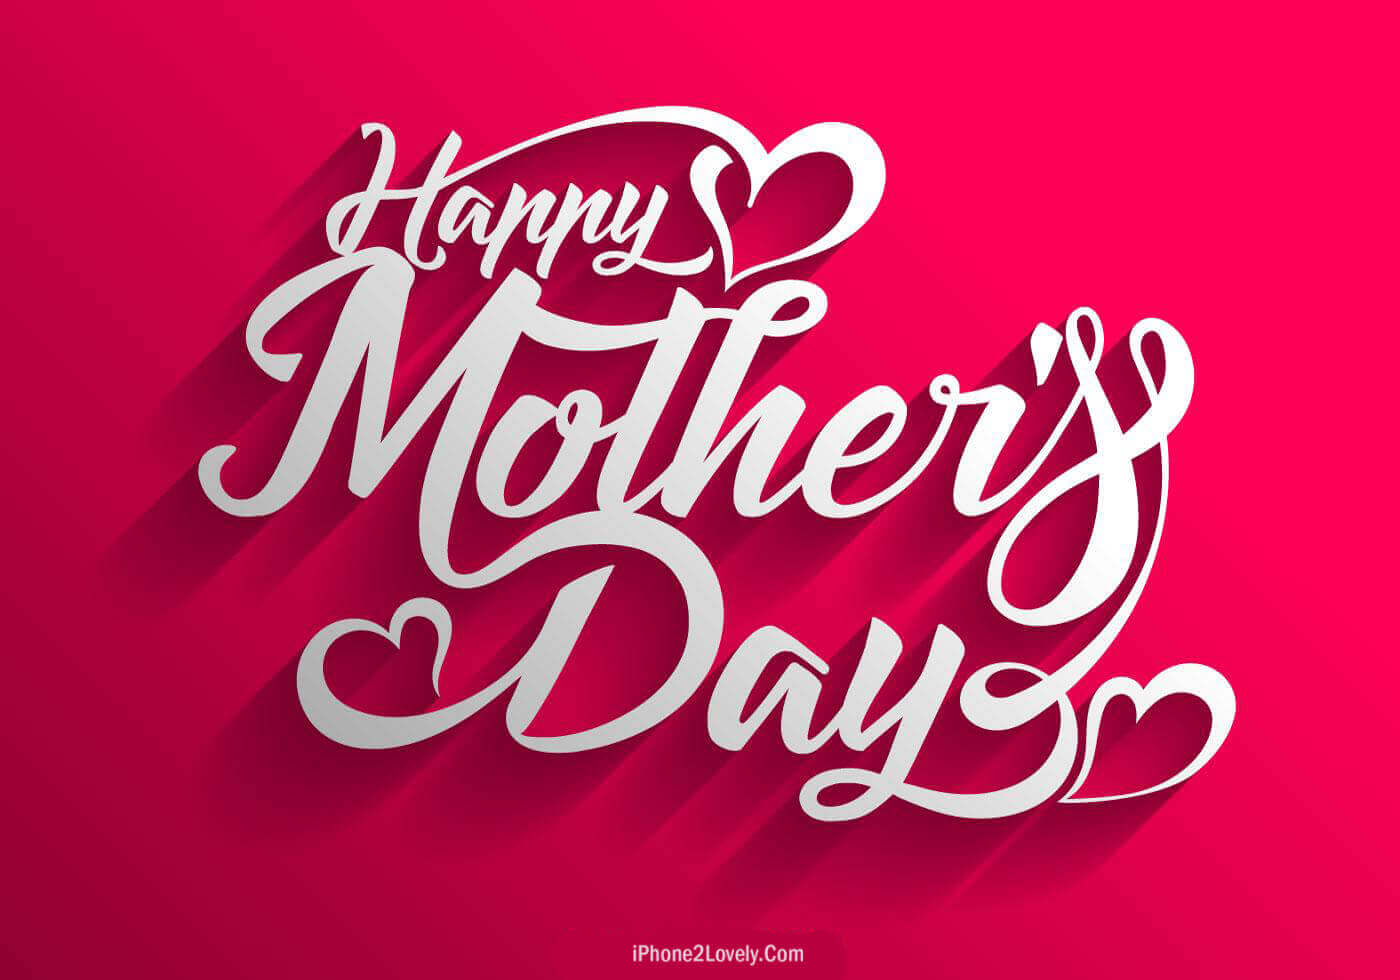 Free download 100 Happy Mothers Day Images and Wallpapers 2020 ...